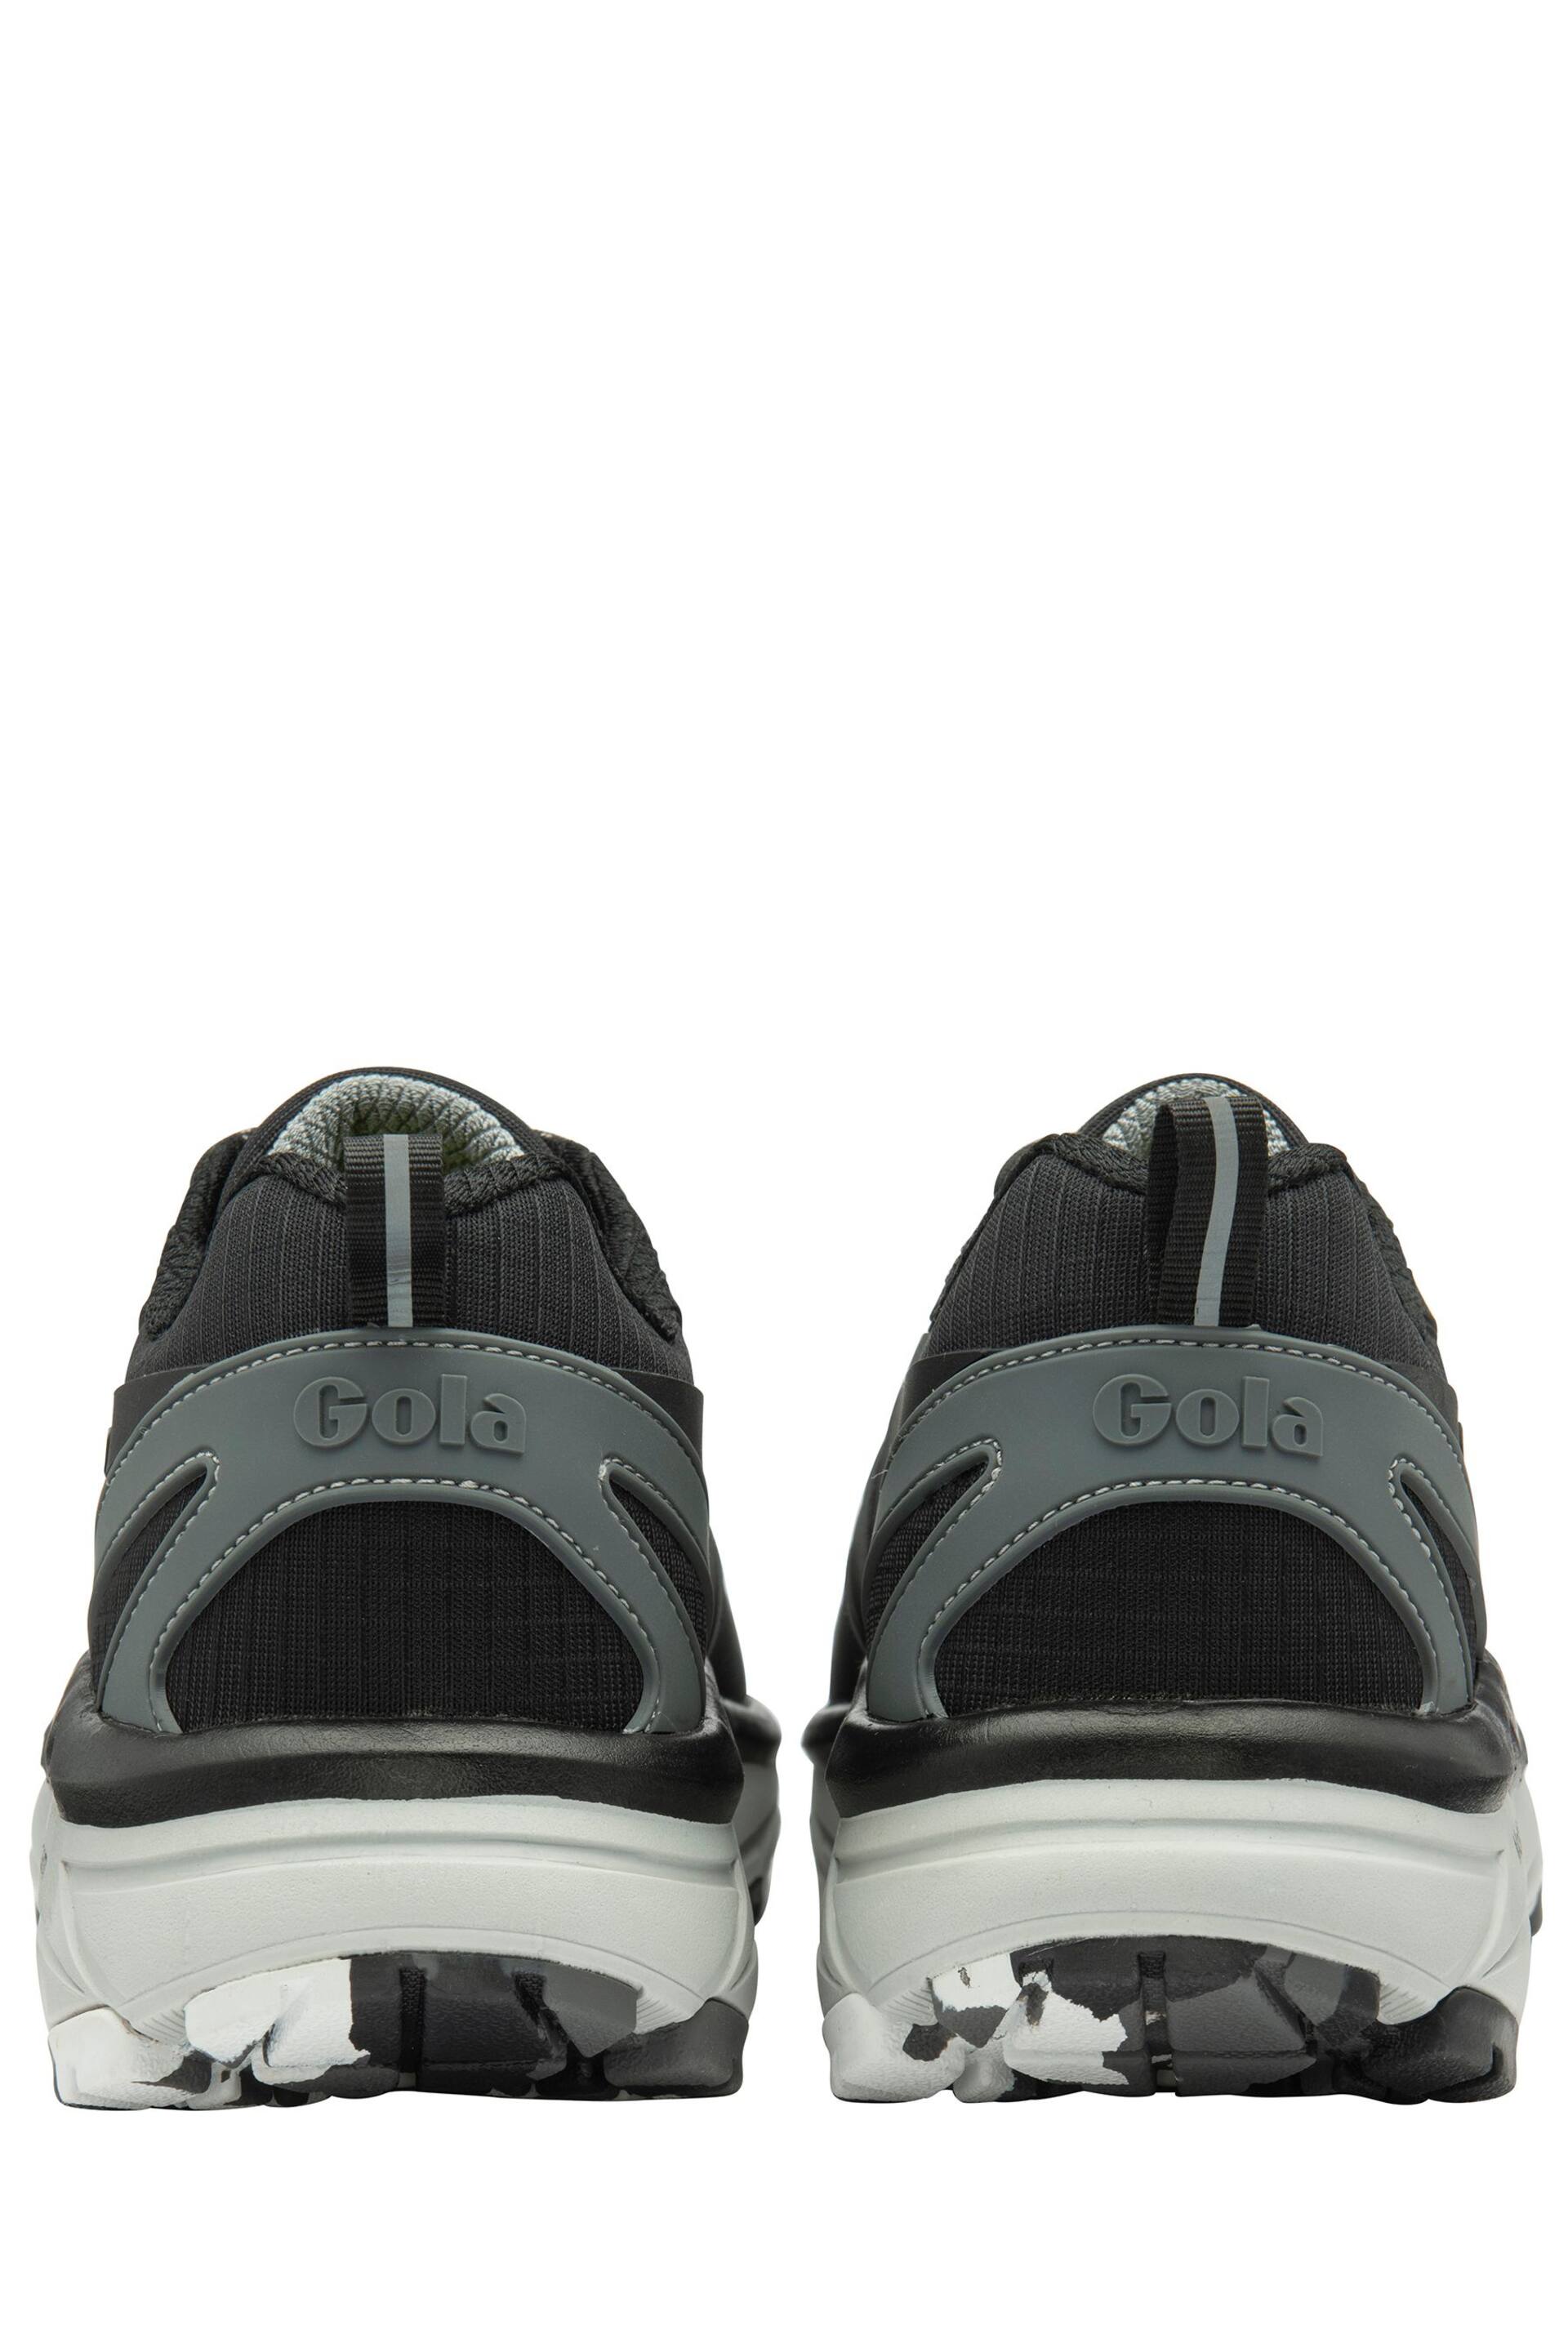 Gola Black Thunder 2 ATR Mesh Lace-Up Mens Running Trainers - Image 3 of 4